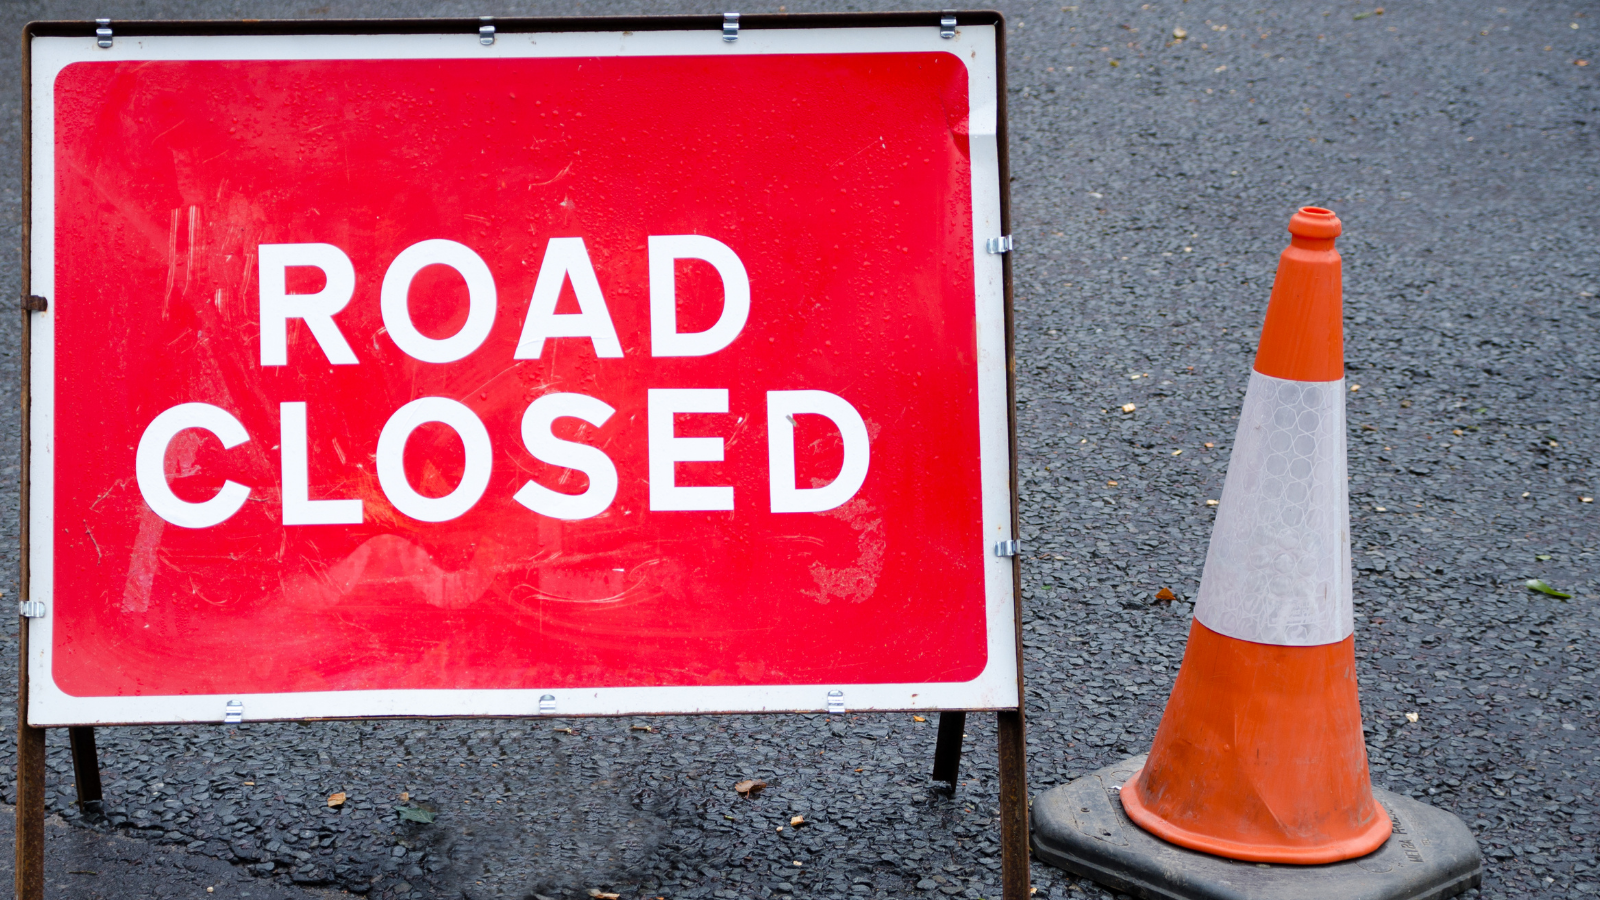 Image of red road closure sign and traffic cone